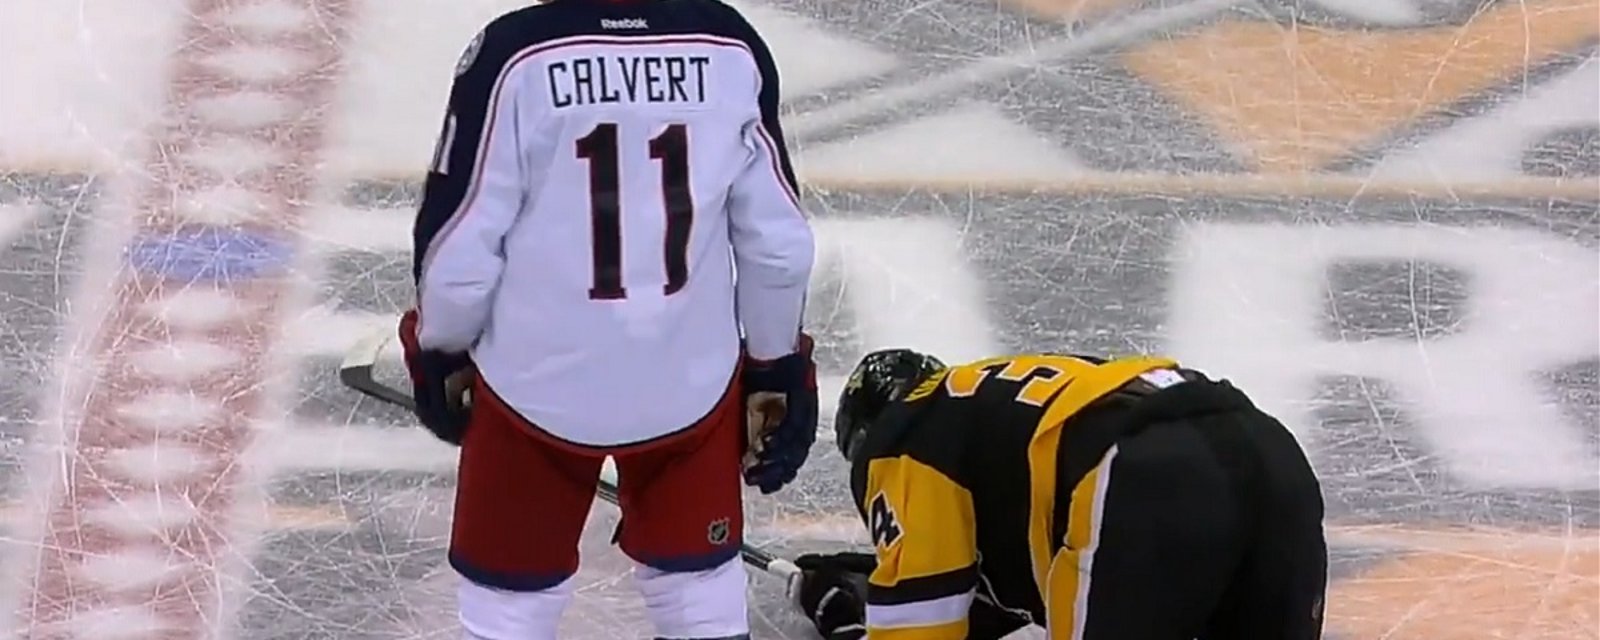 Calvert literally breaks his stick over the back of his opponent!